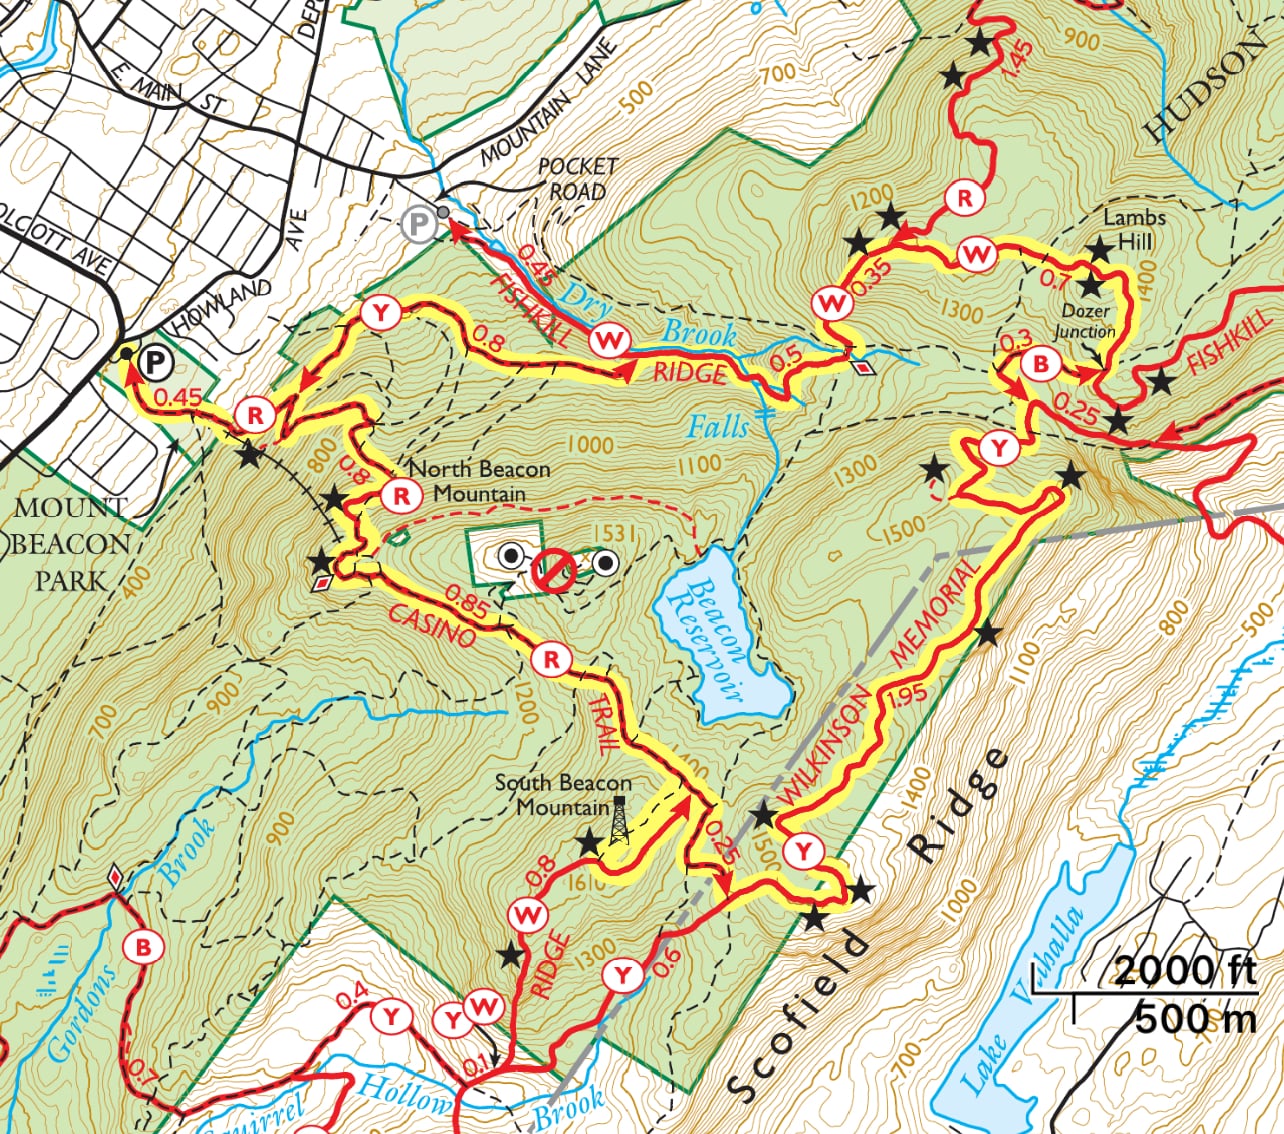 Mount Beacon and Lambs Hill Trail Map